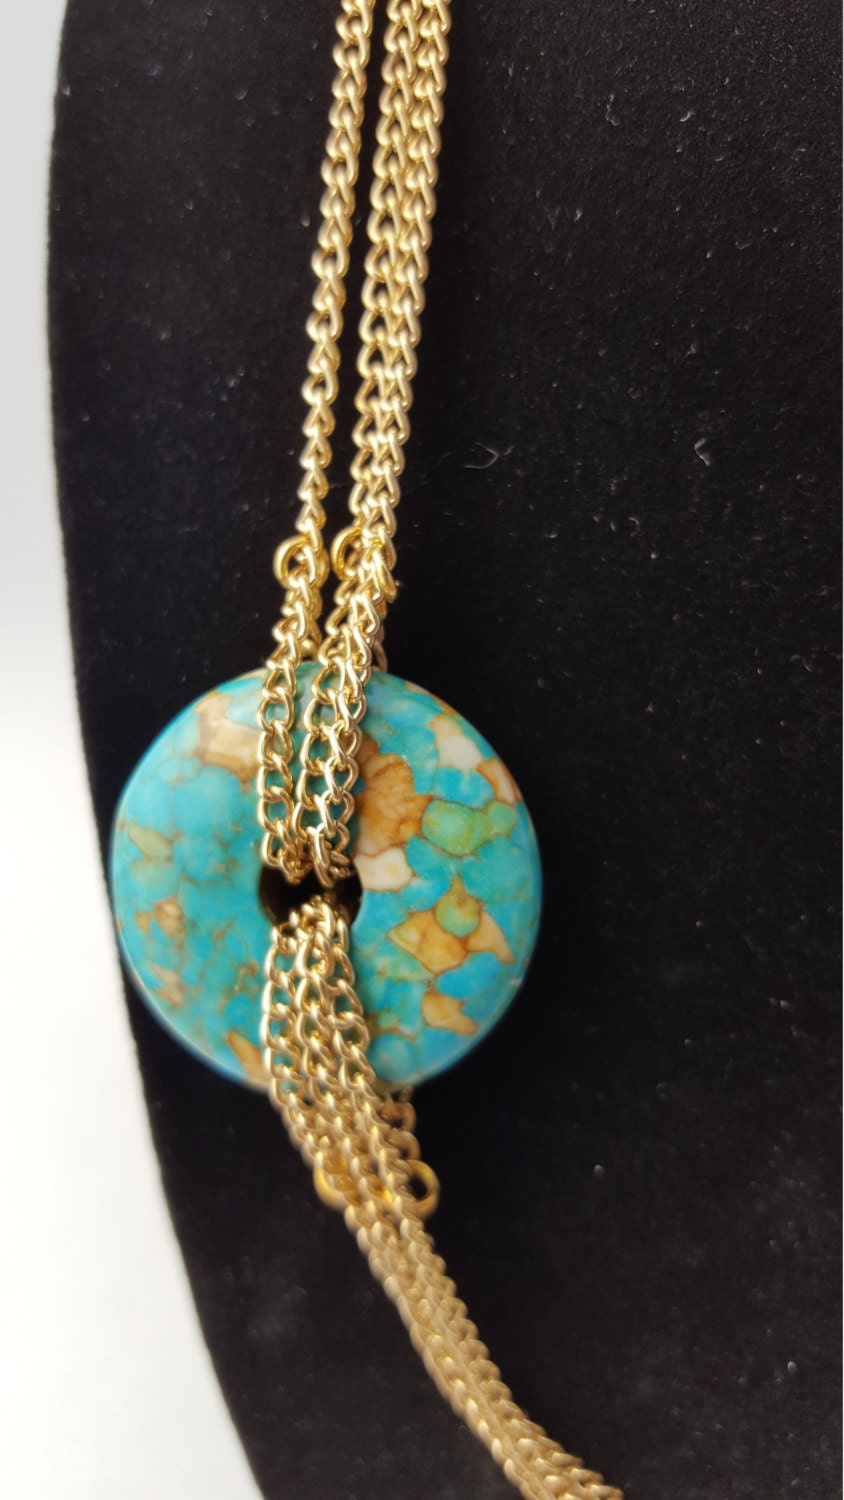 13029 Turquoise Colored Stone Necklace - Etsy